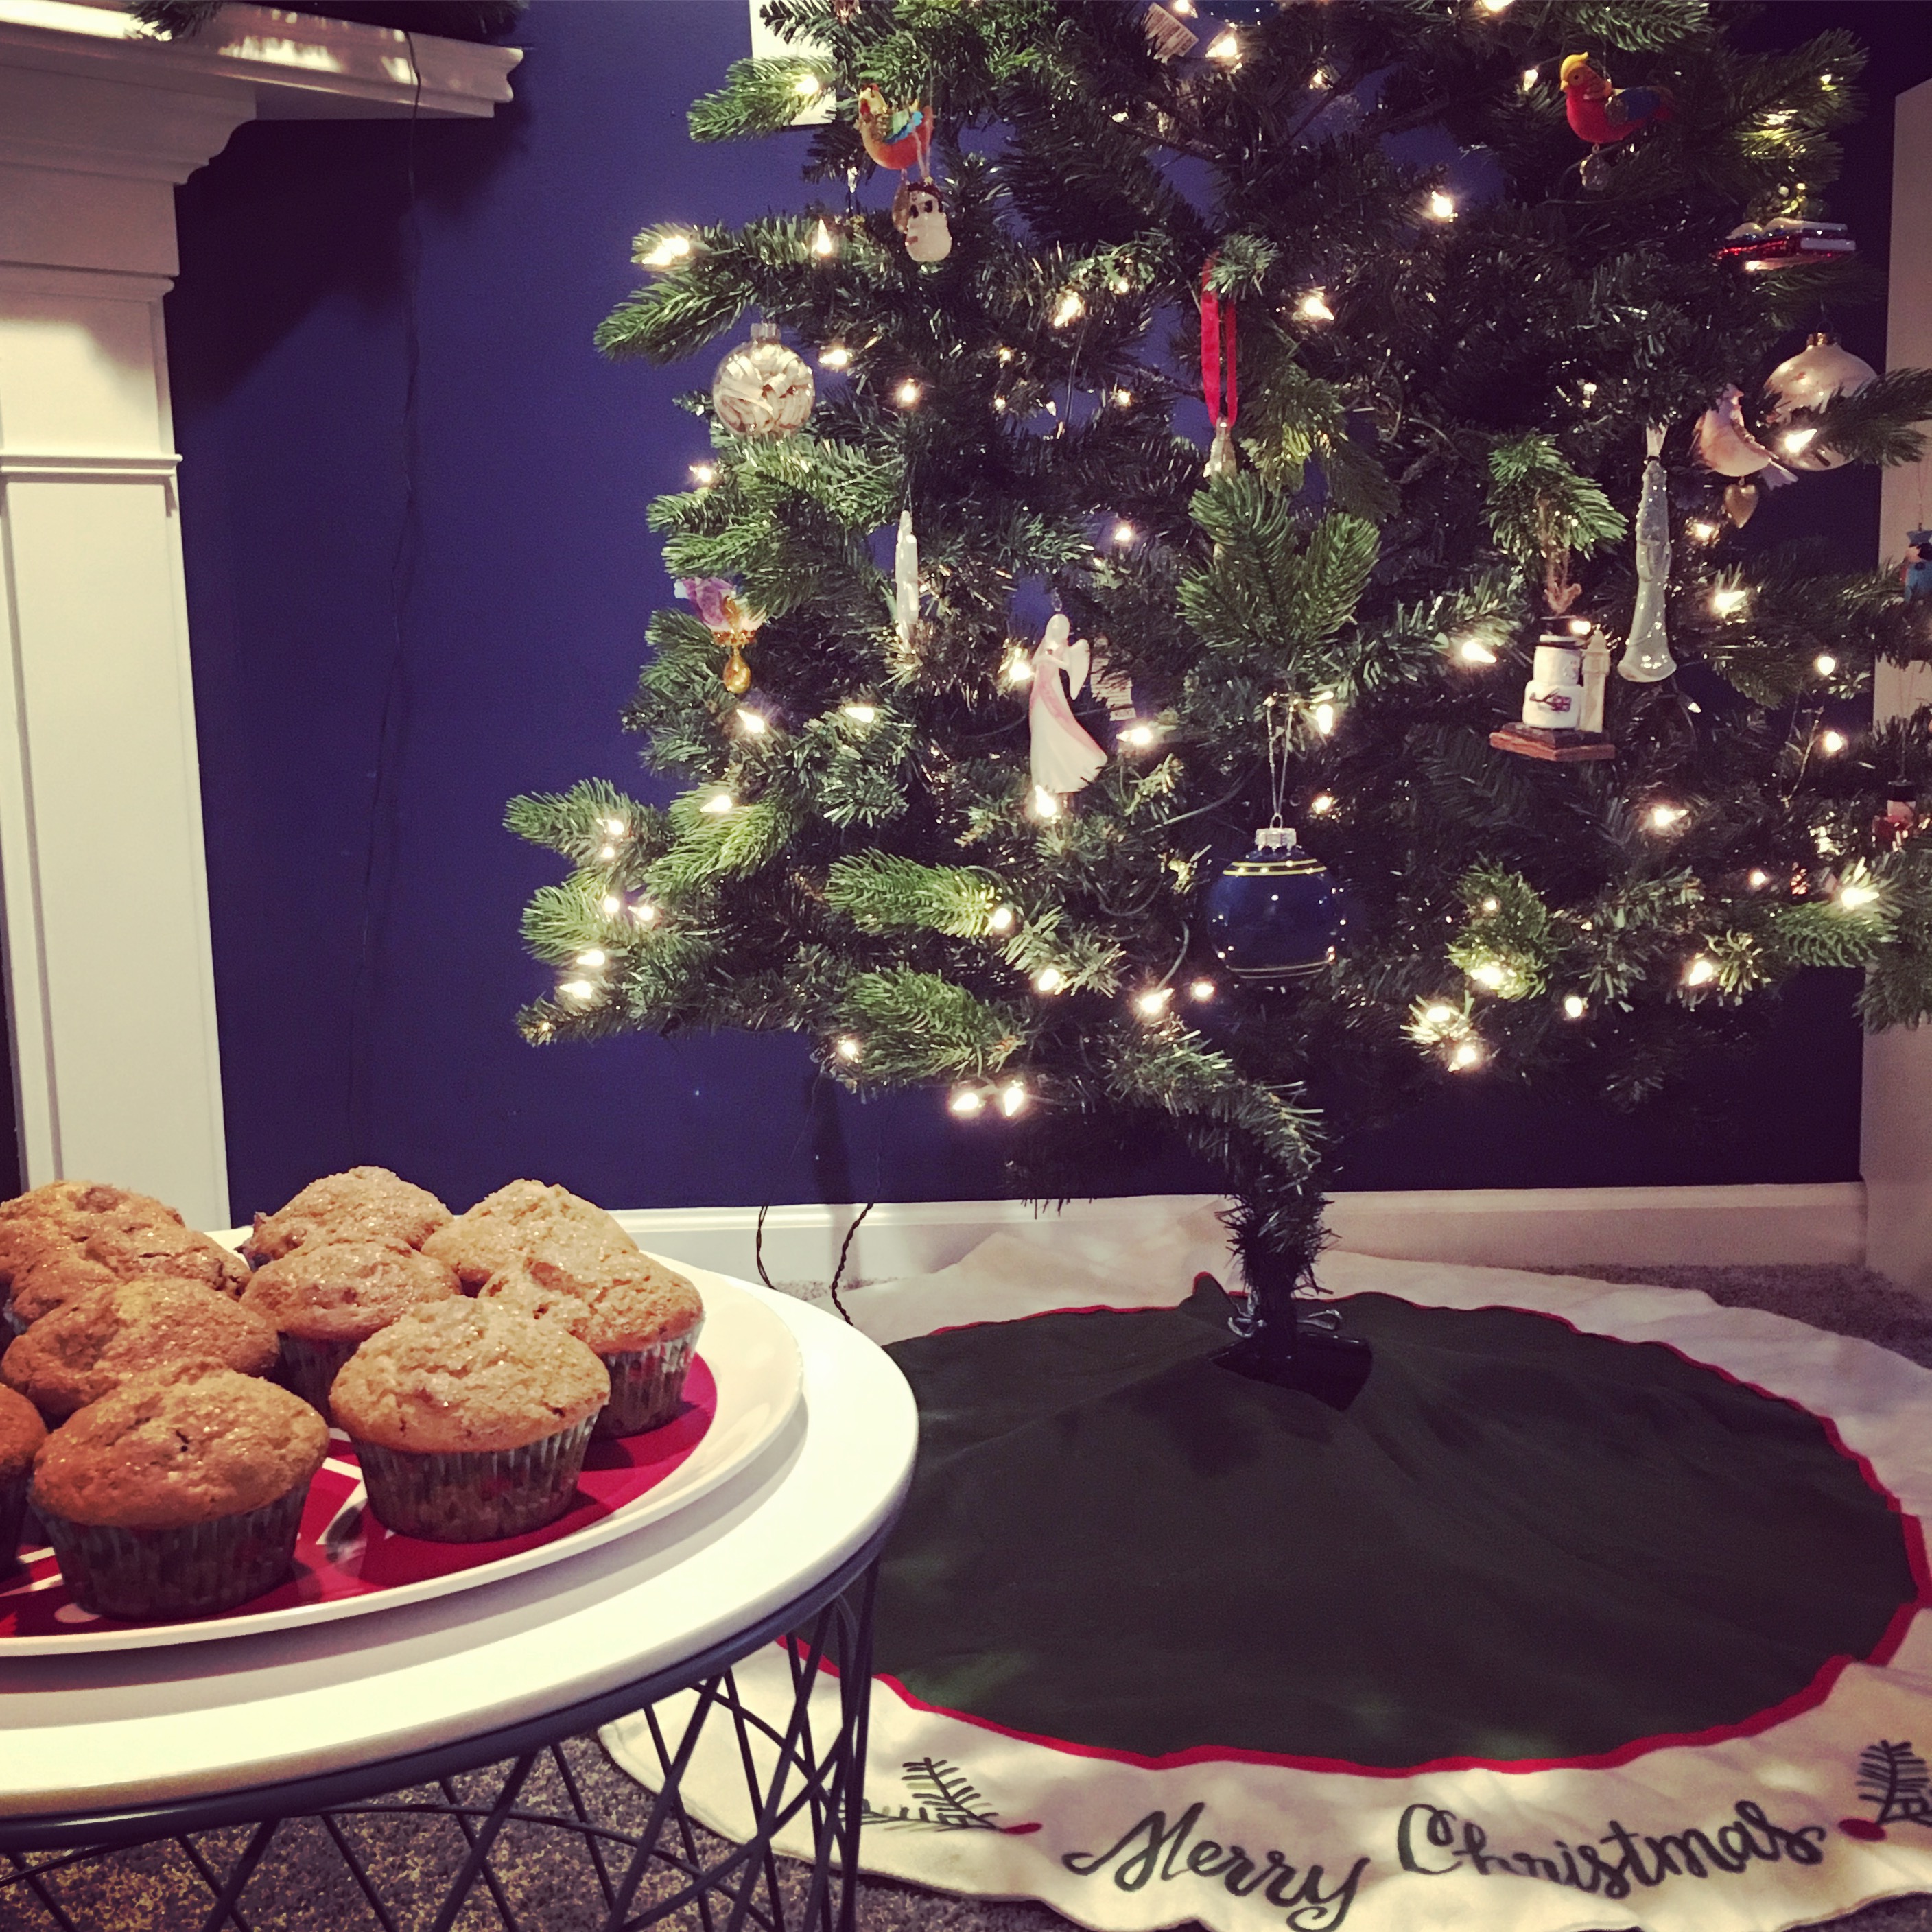 Christmas Morning Muffins